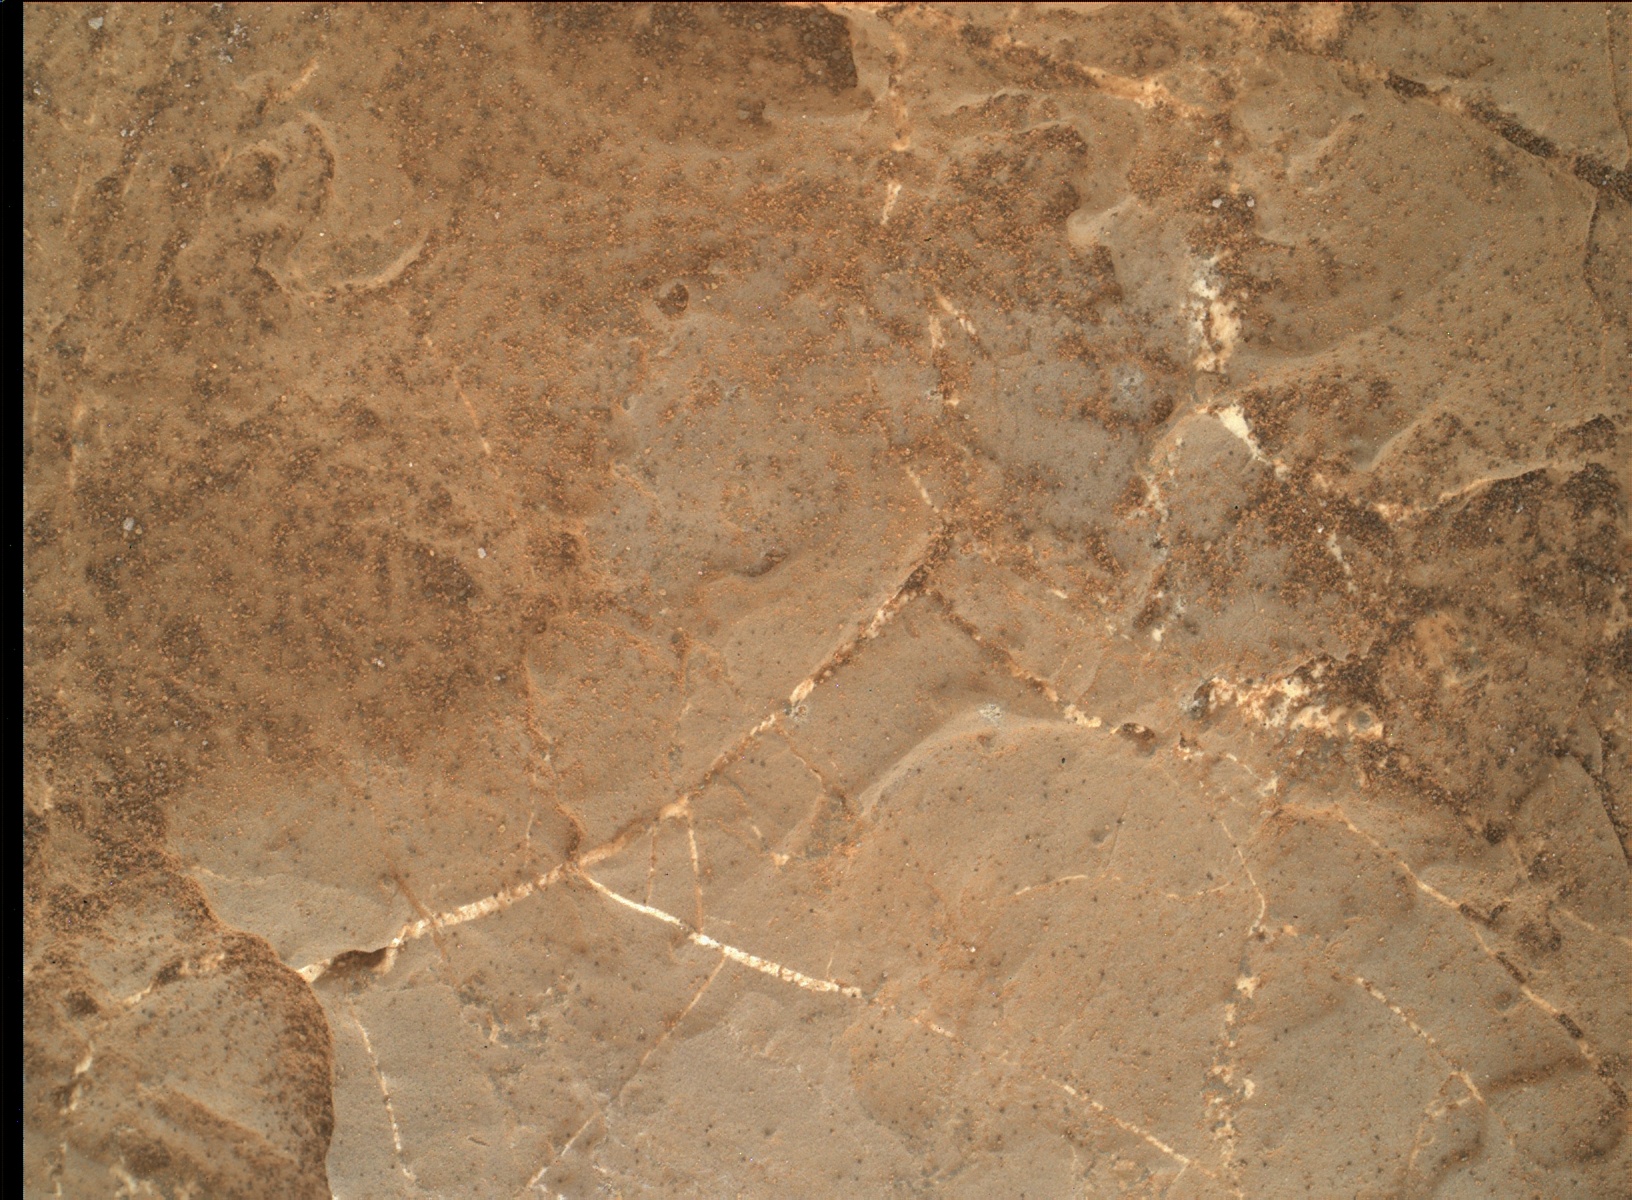 Nasa's Mars rover Curiosity acquired this image using its Mars Hand Lens Imager (MAHLI) on Sol 1982